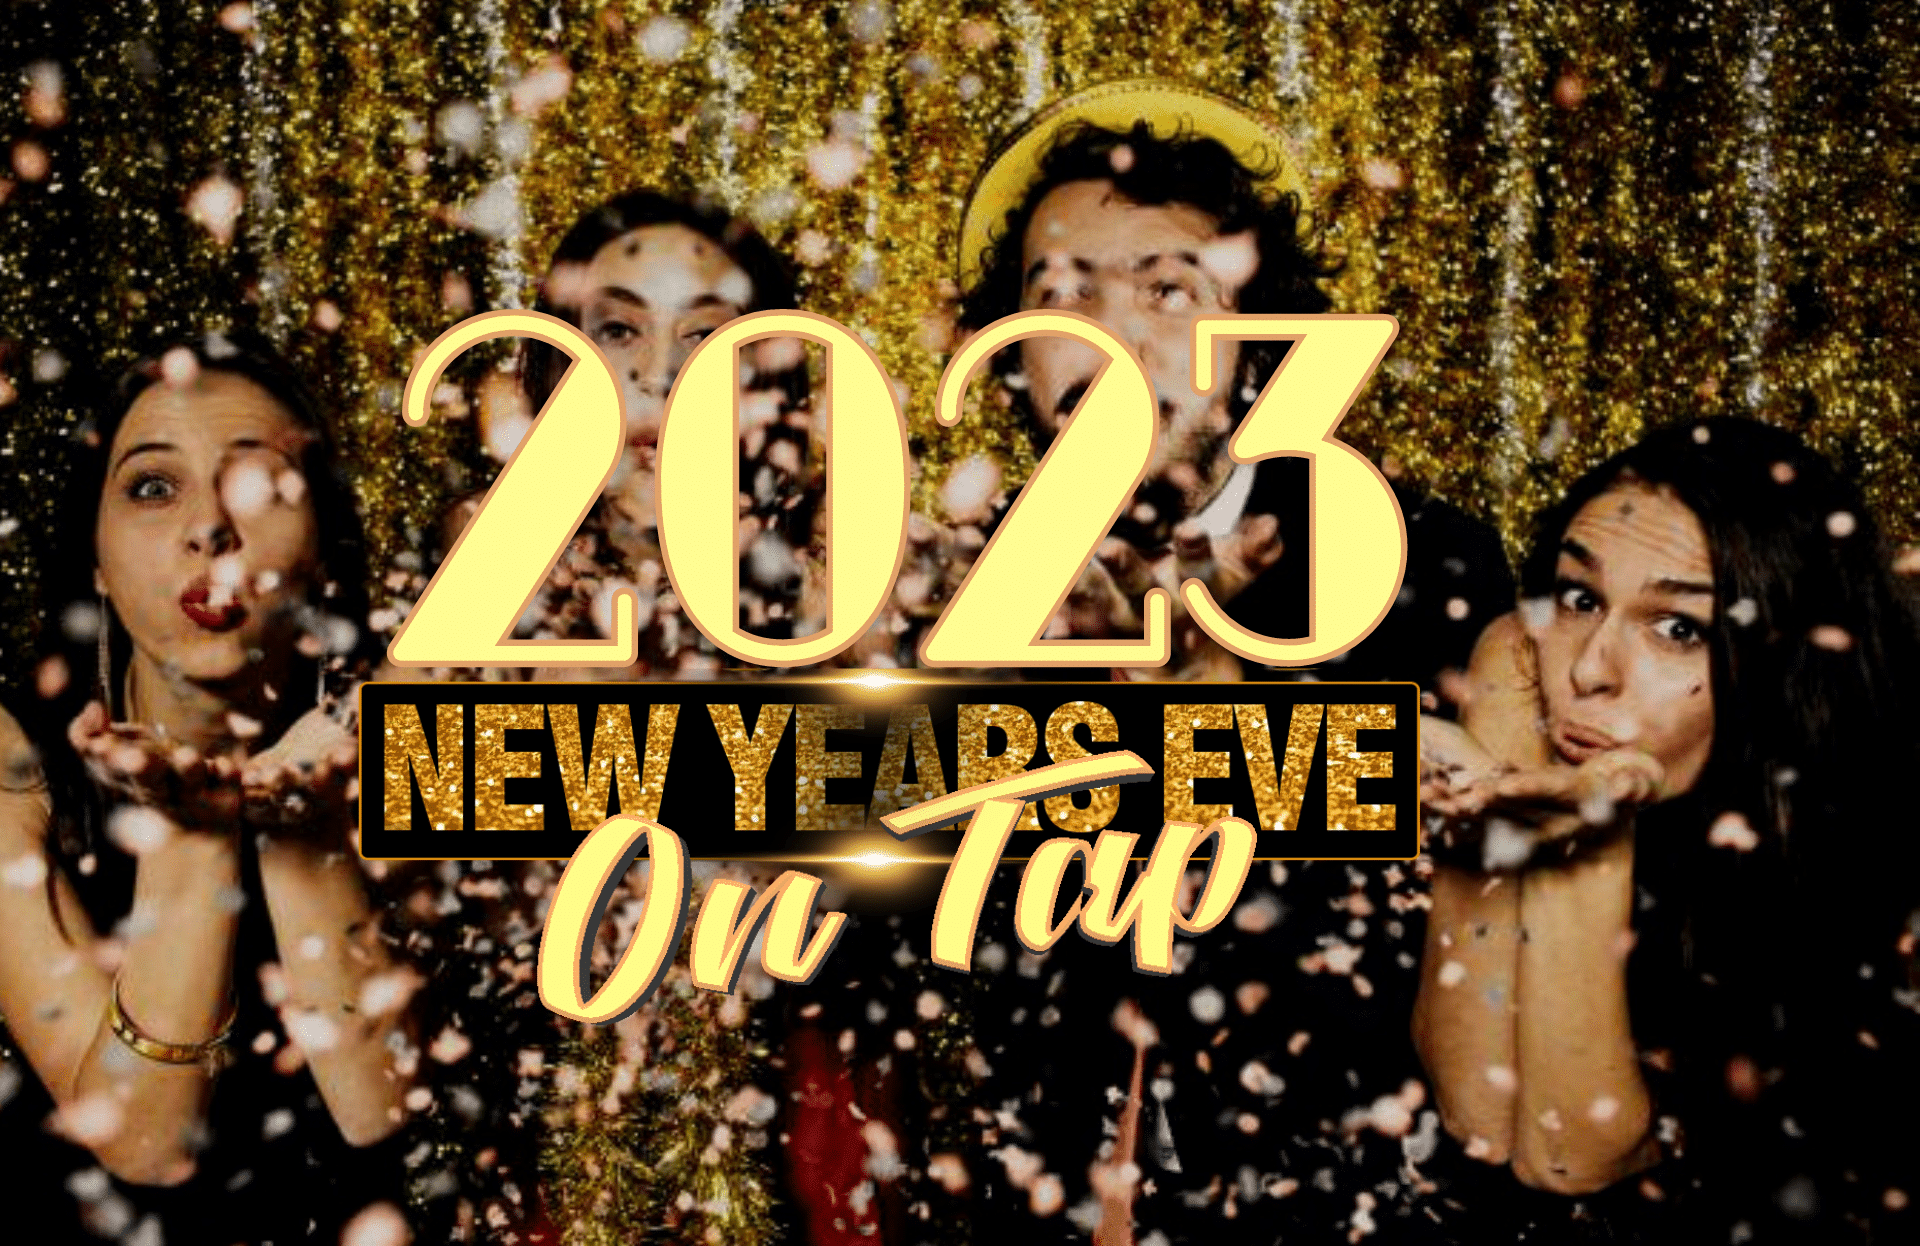 2023 New Years Eve on tap